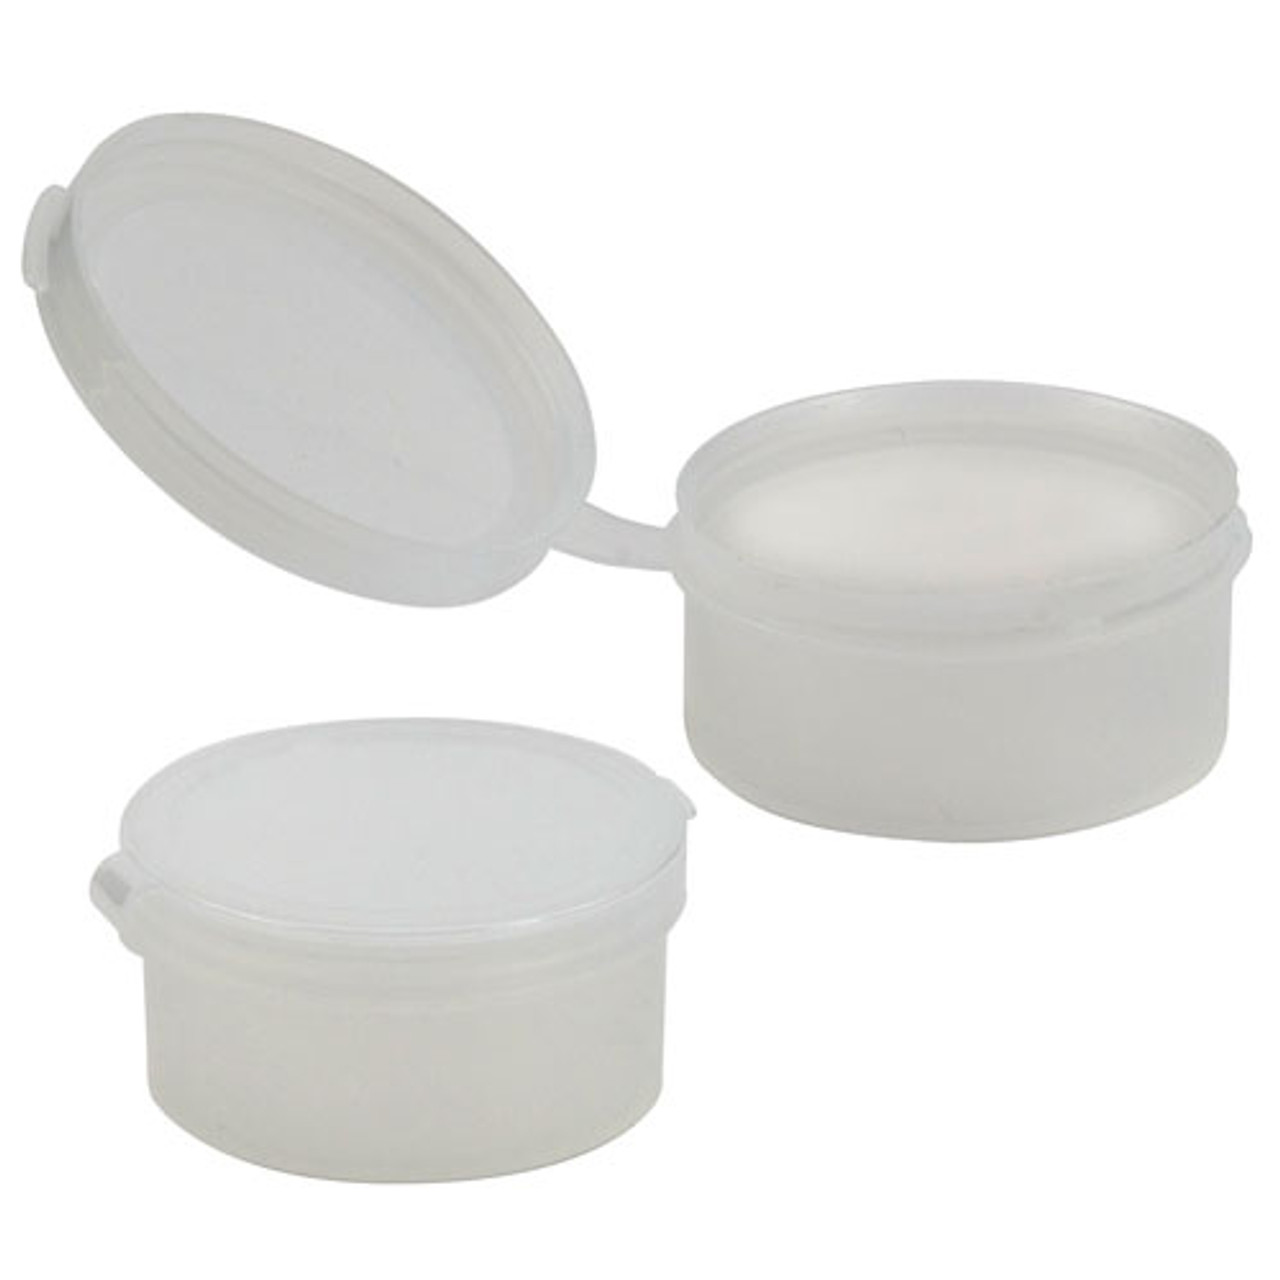 2oz. Plastic Containers Round Containers Storage Containers